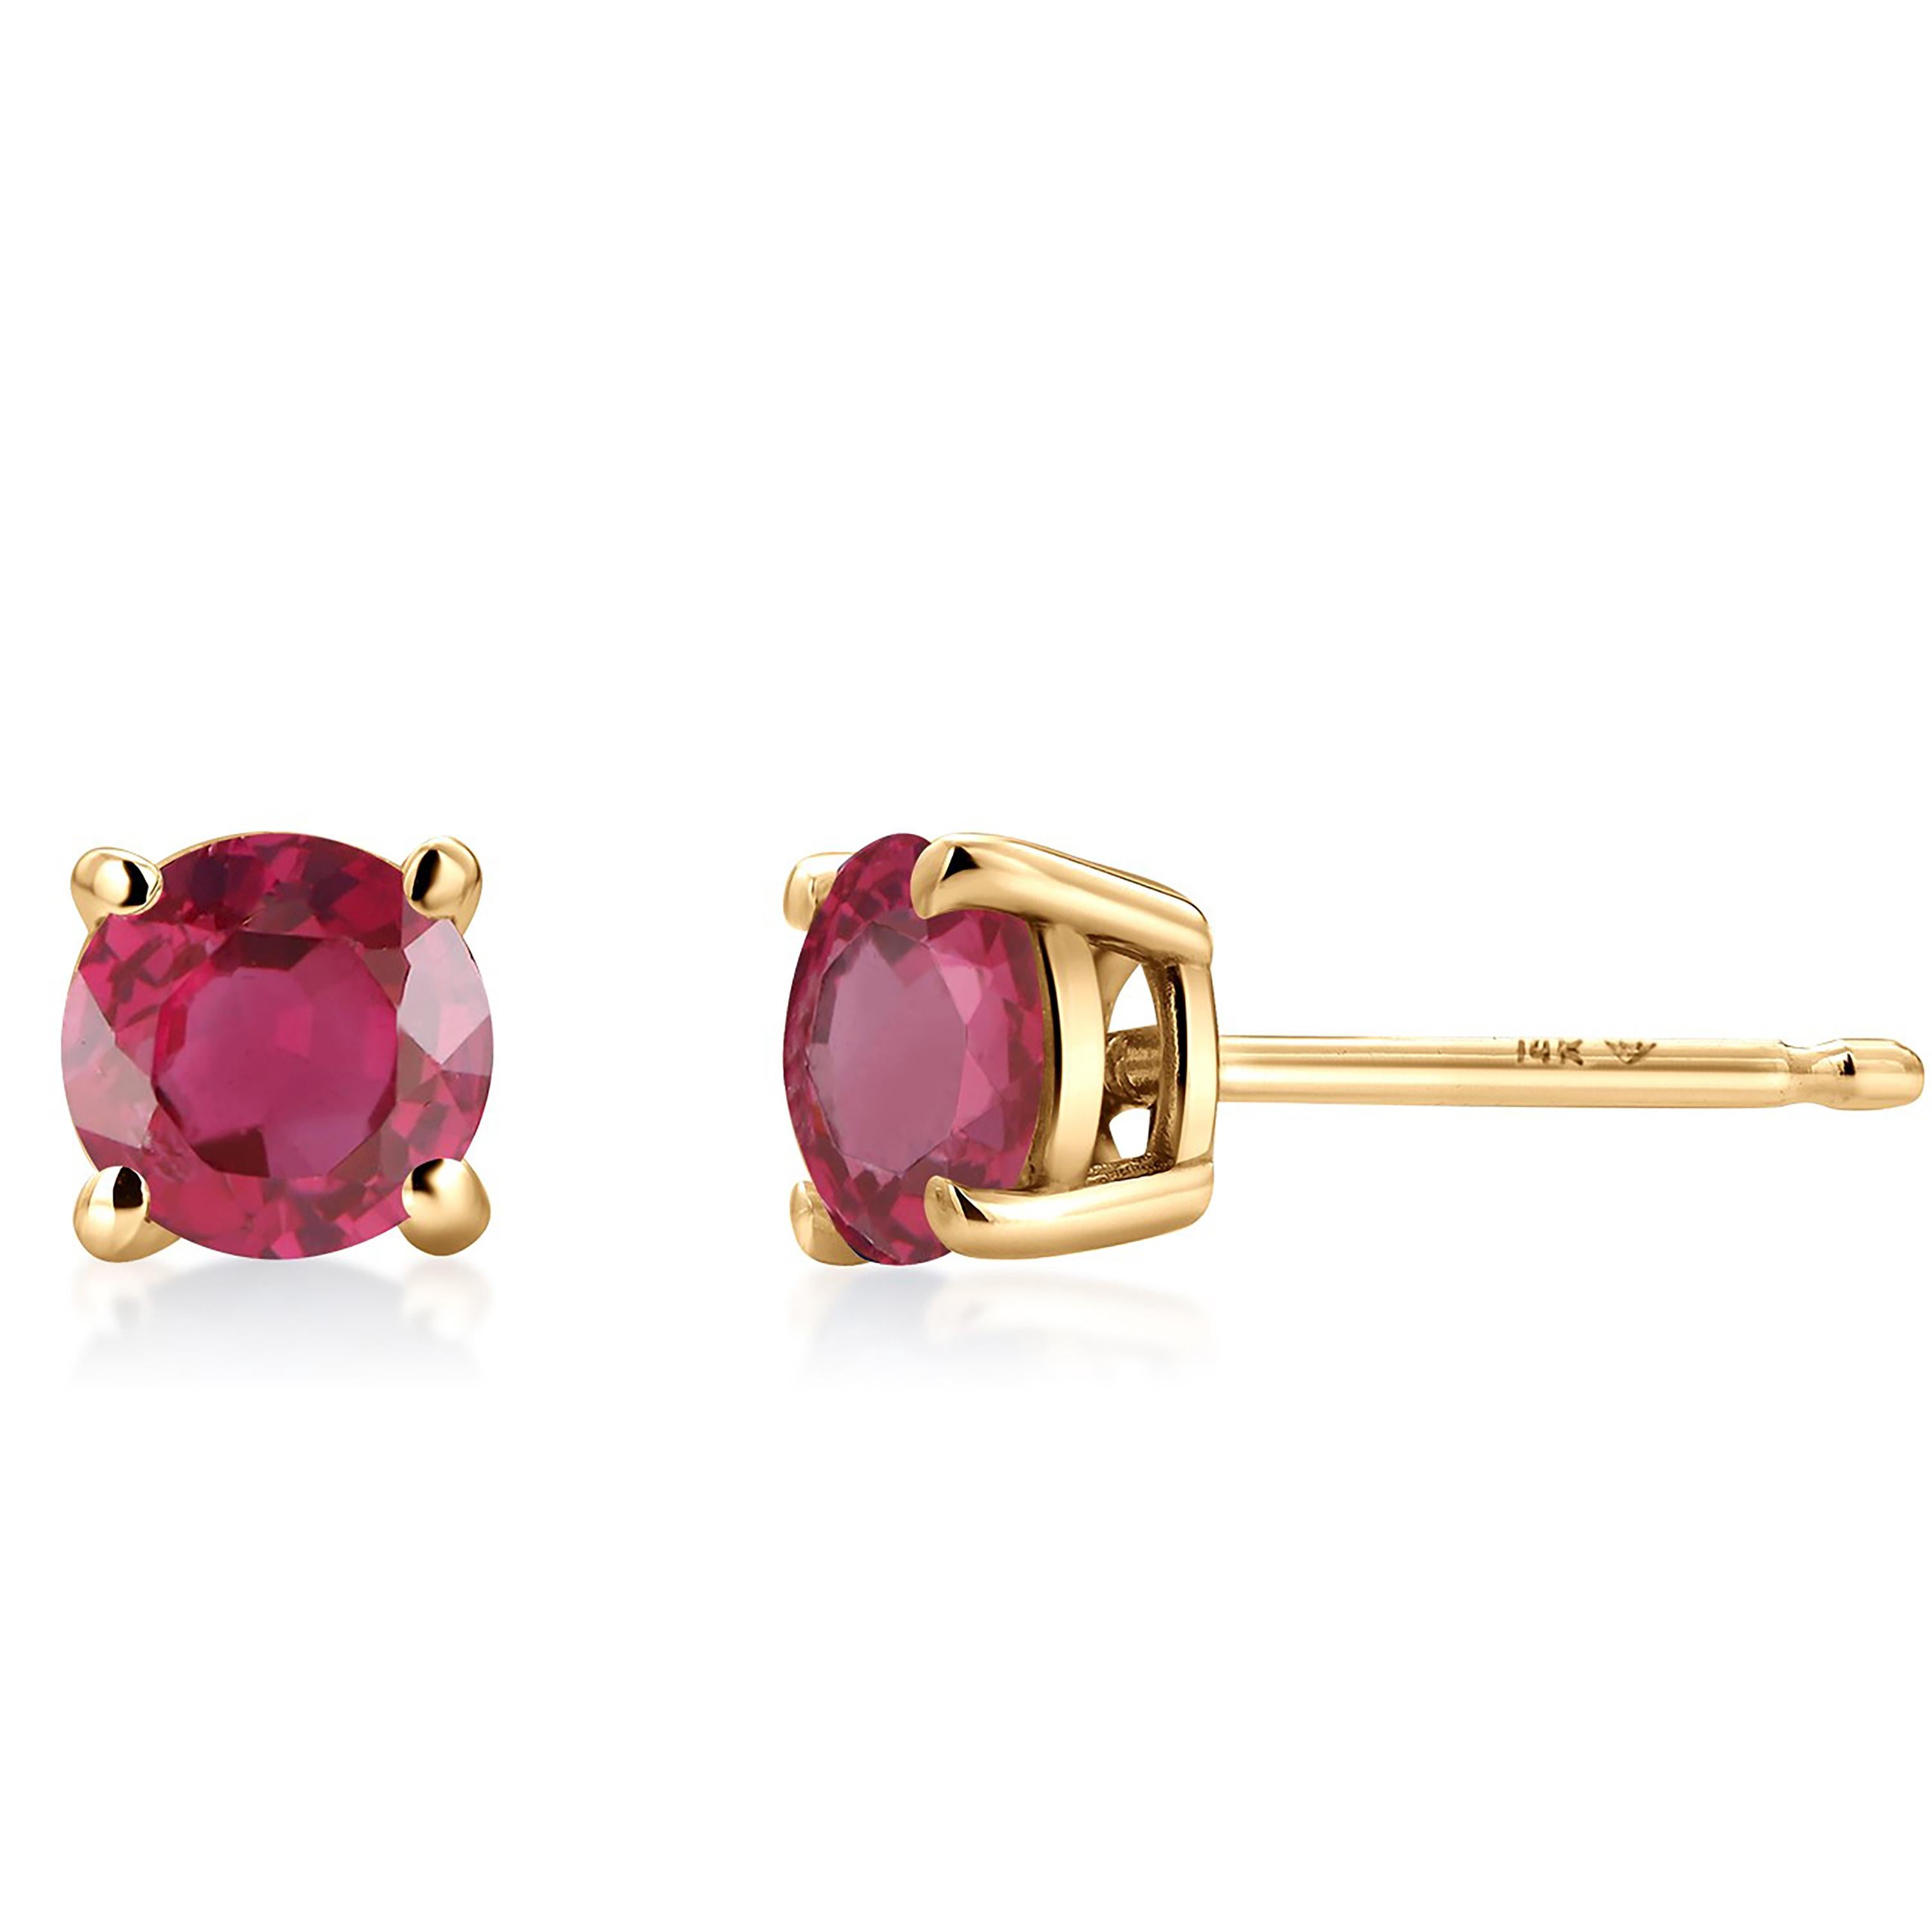 Two Matched Burma Rubies Weighing 1.05 Carat 0.20 Inch Yellow Gold Stud Earrings In New Condition For Sale In New York, NY